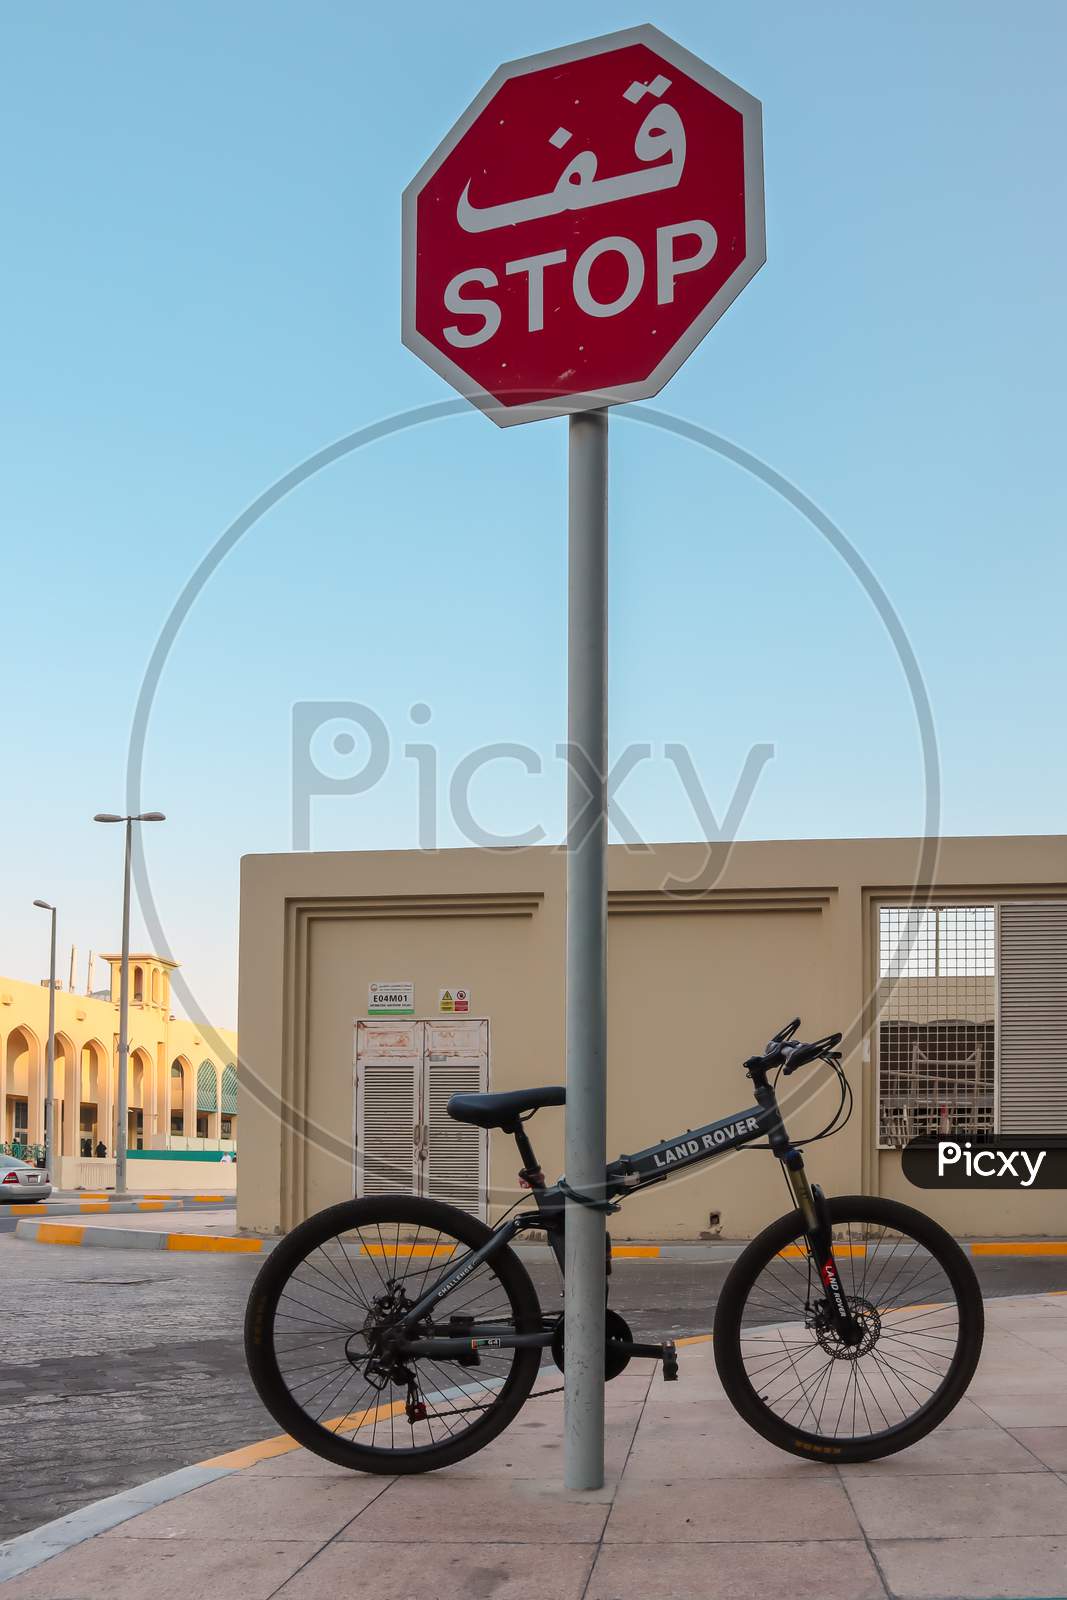 Abu Dhabi - 8 September 2020, A Black Land Rover Bicycle Is Parking In The Middle Of The City, Uae